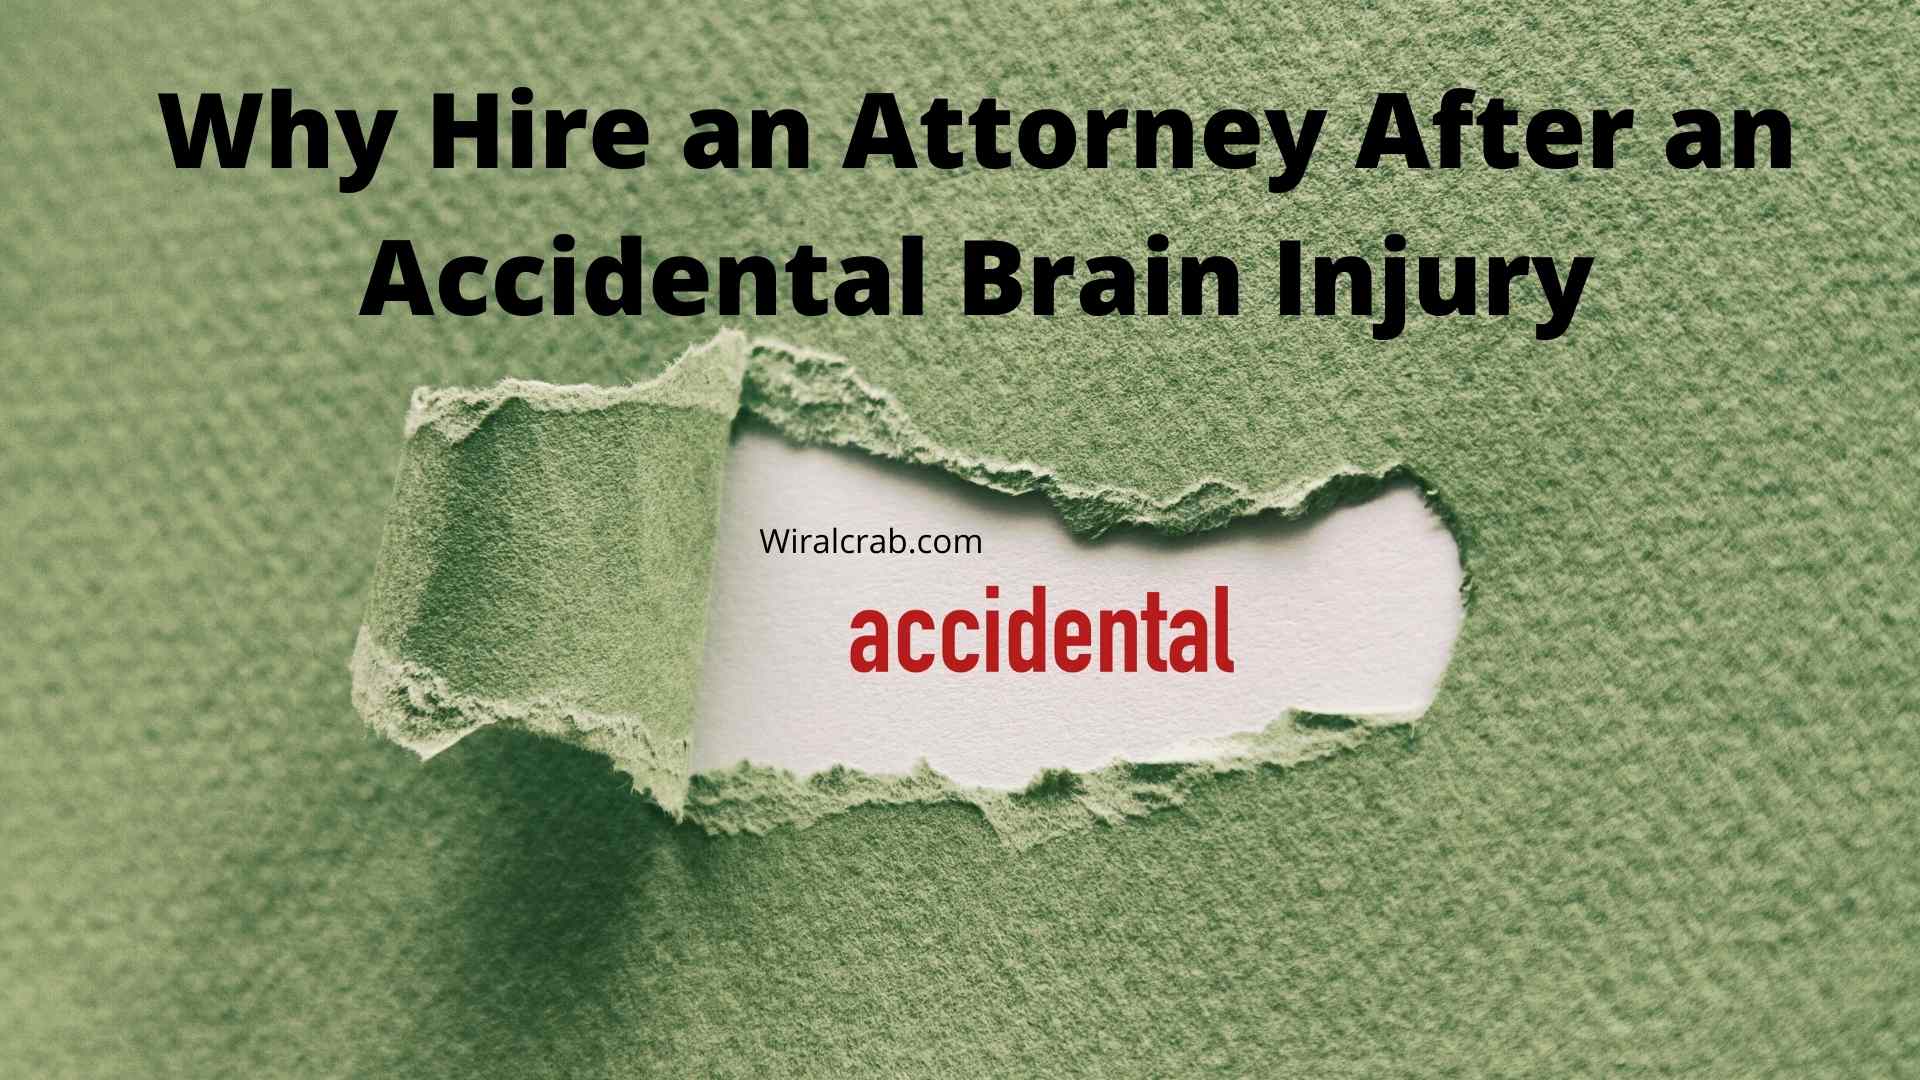 Why Hire an Attorney After an Accidental Brain Injury?